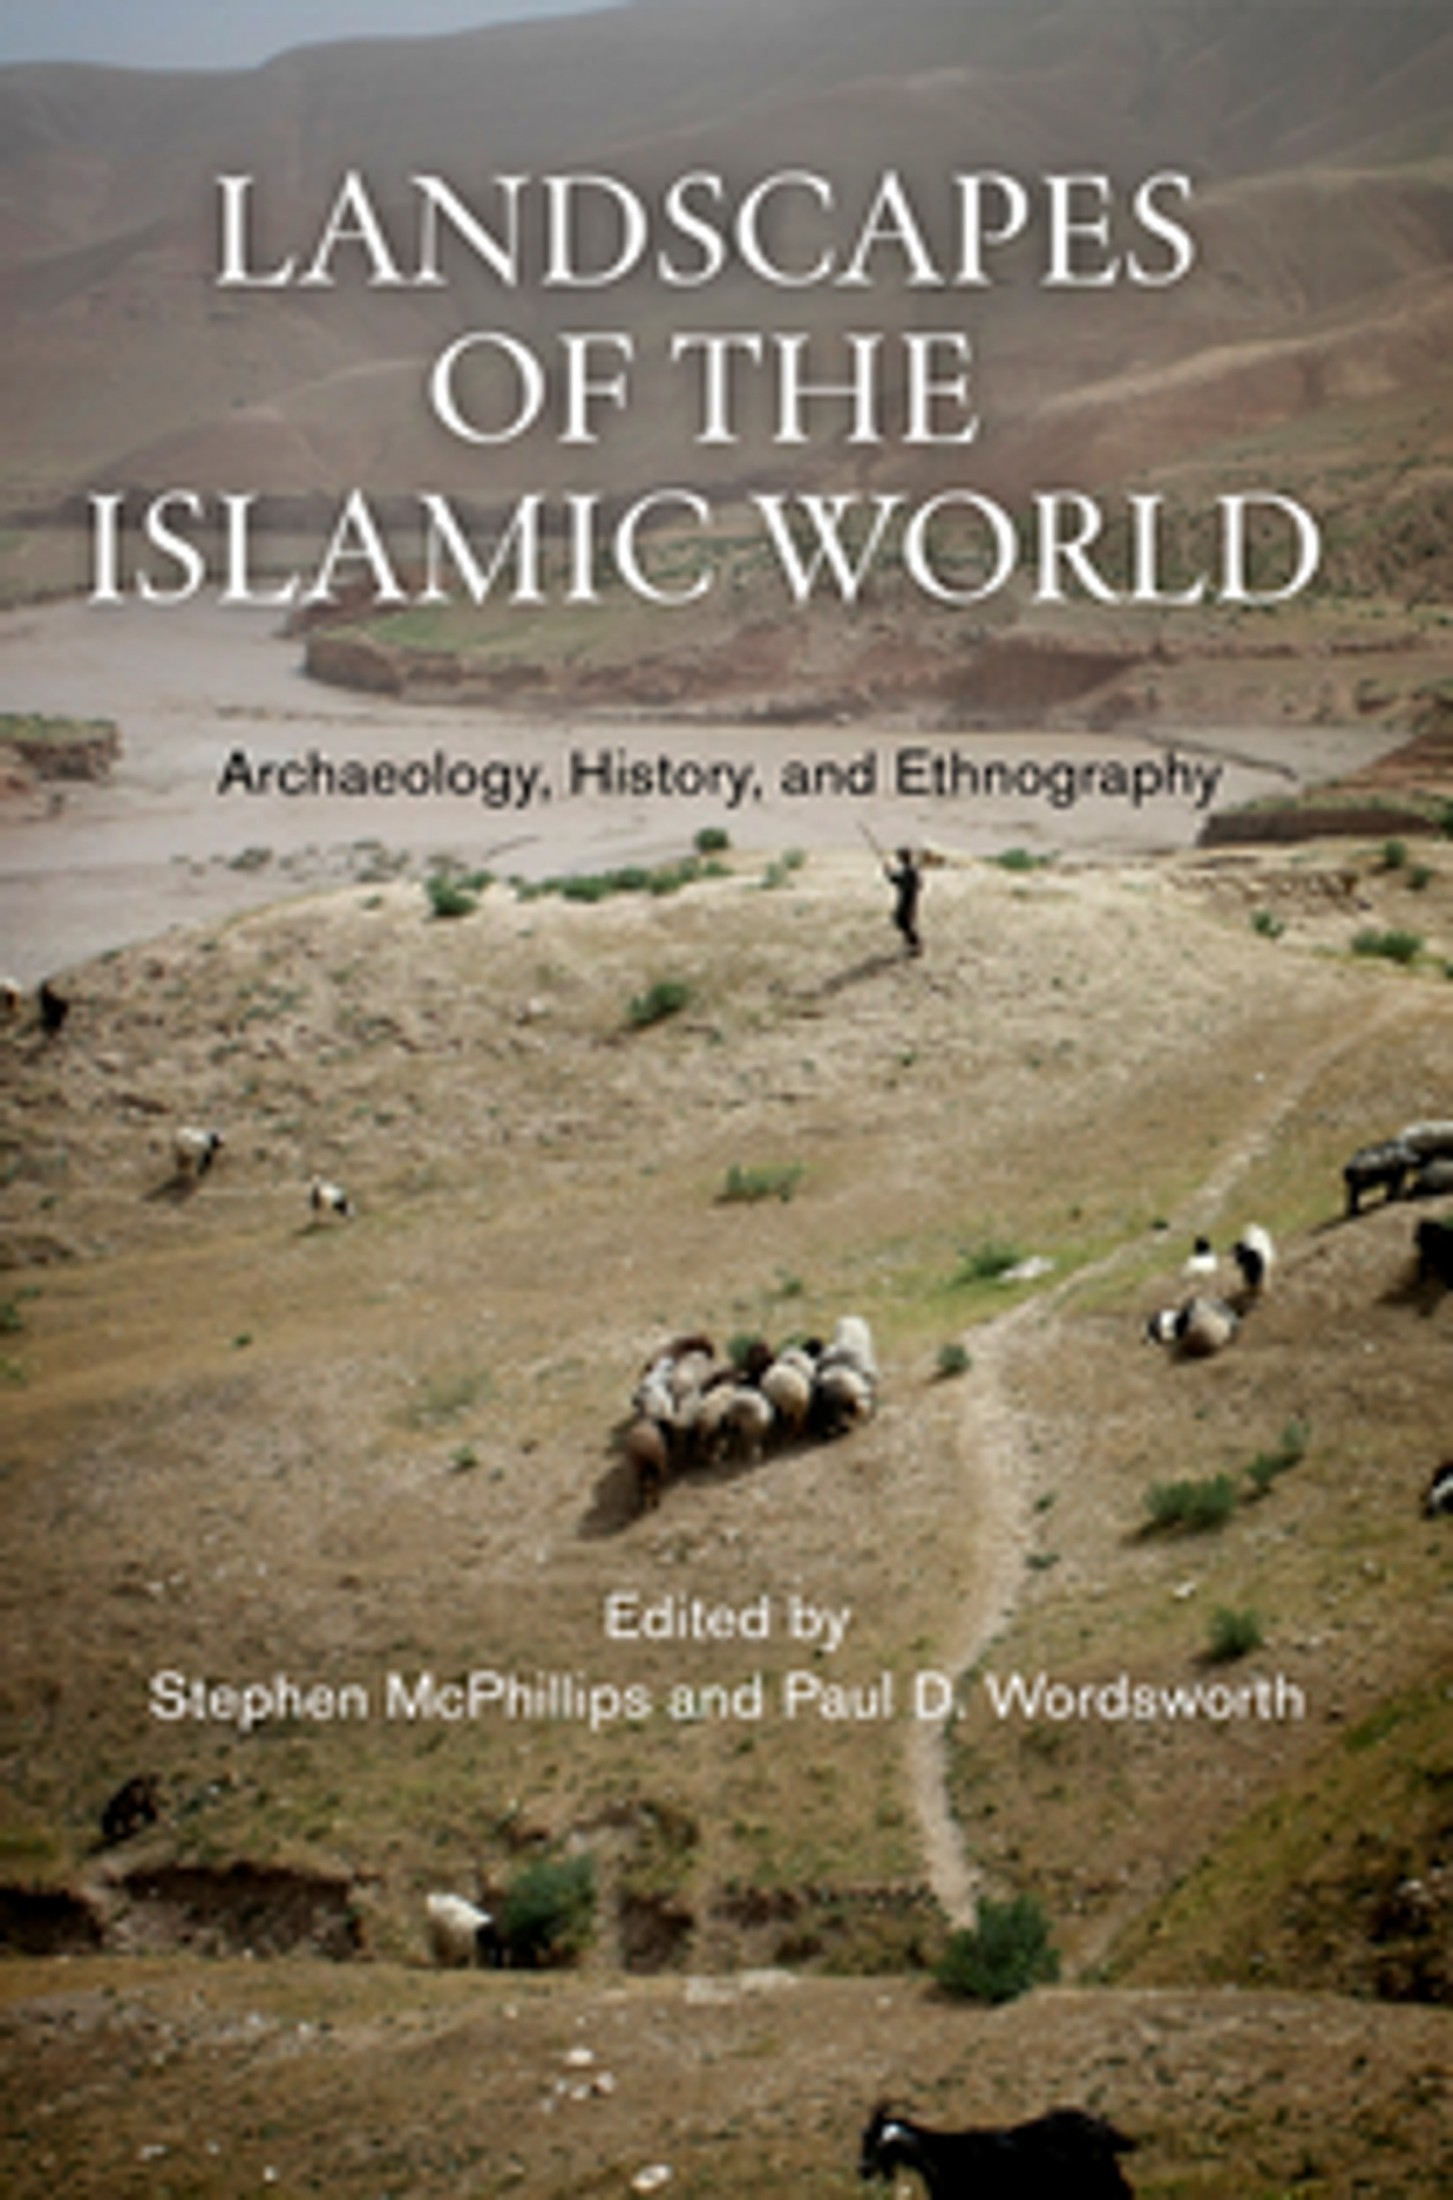 Landscapes of the Islamic World: Archaeology, History, and Ethnography